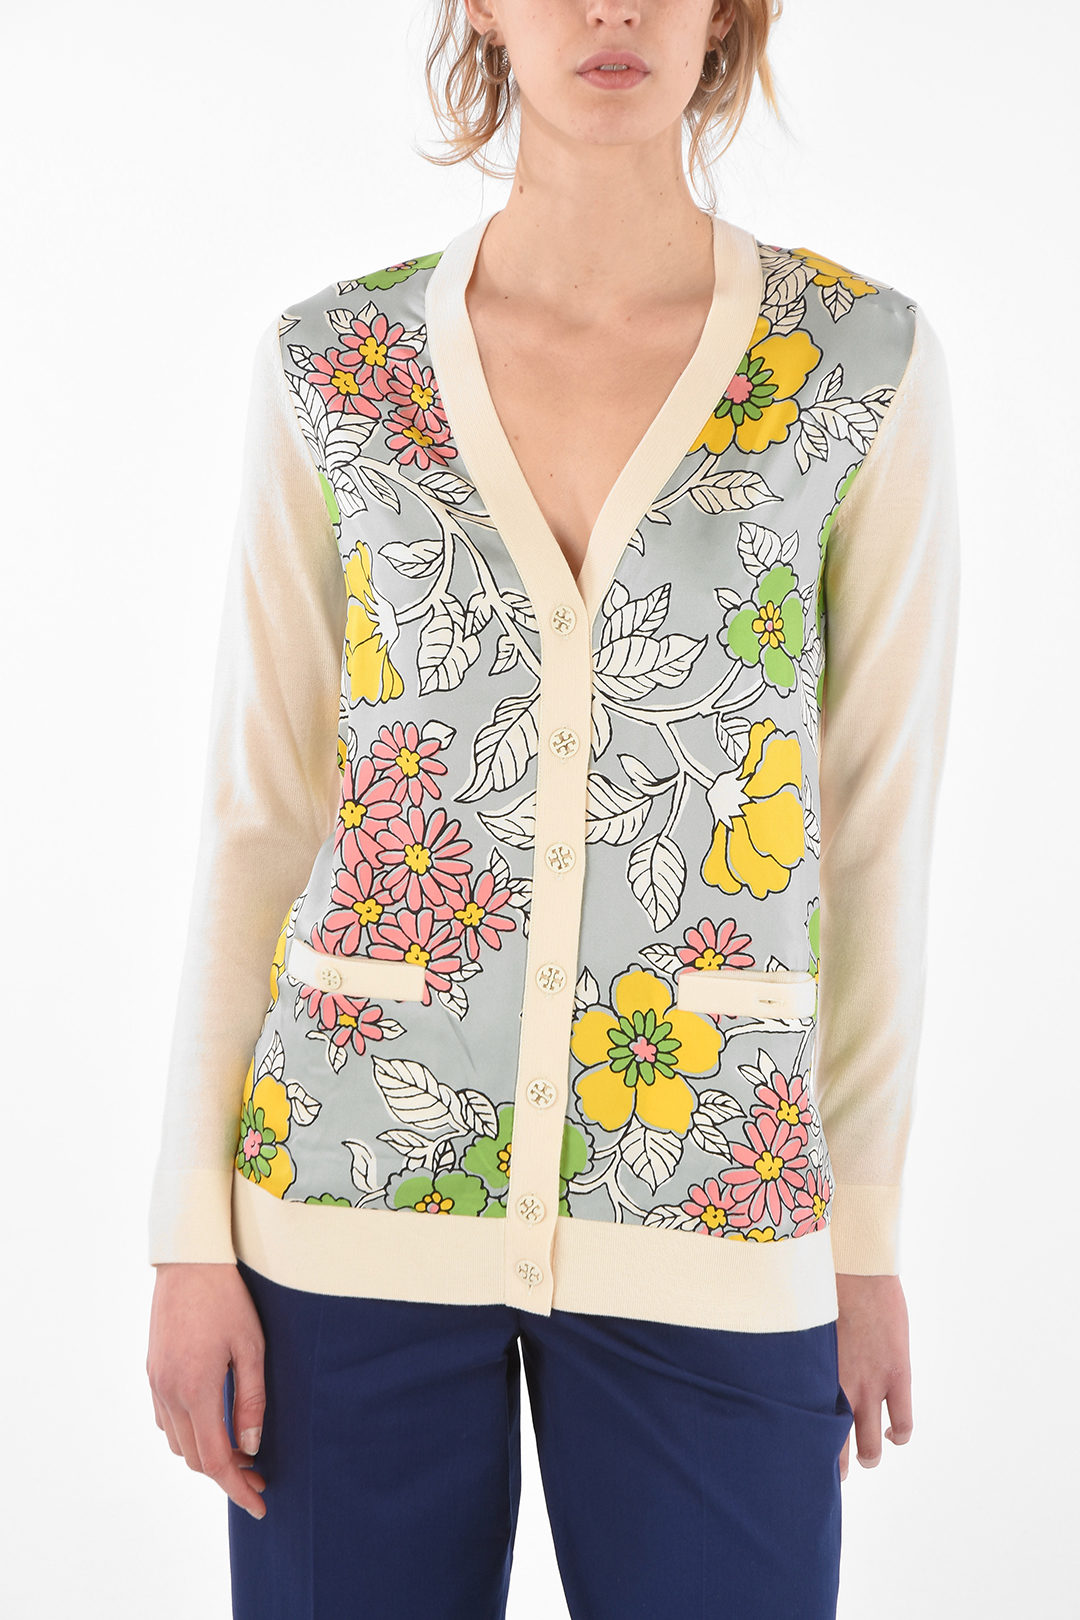 Tory Burch Wool BOYFRIEND Cardigan with Floral Printed Silk Front Panel  women - Glamood Outlet